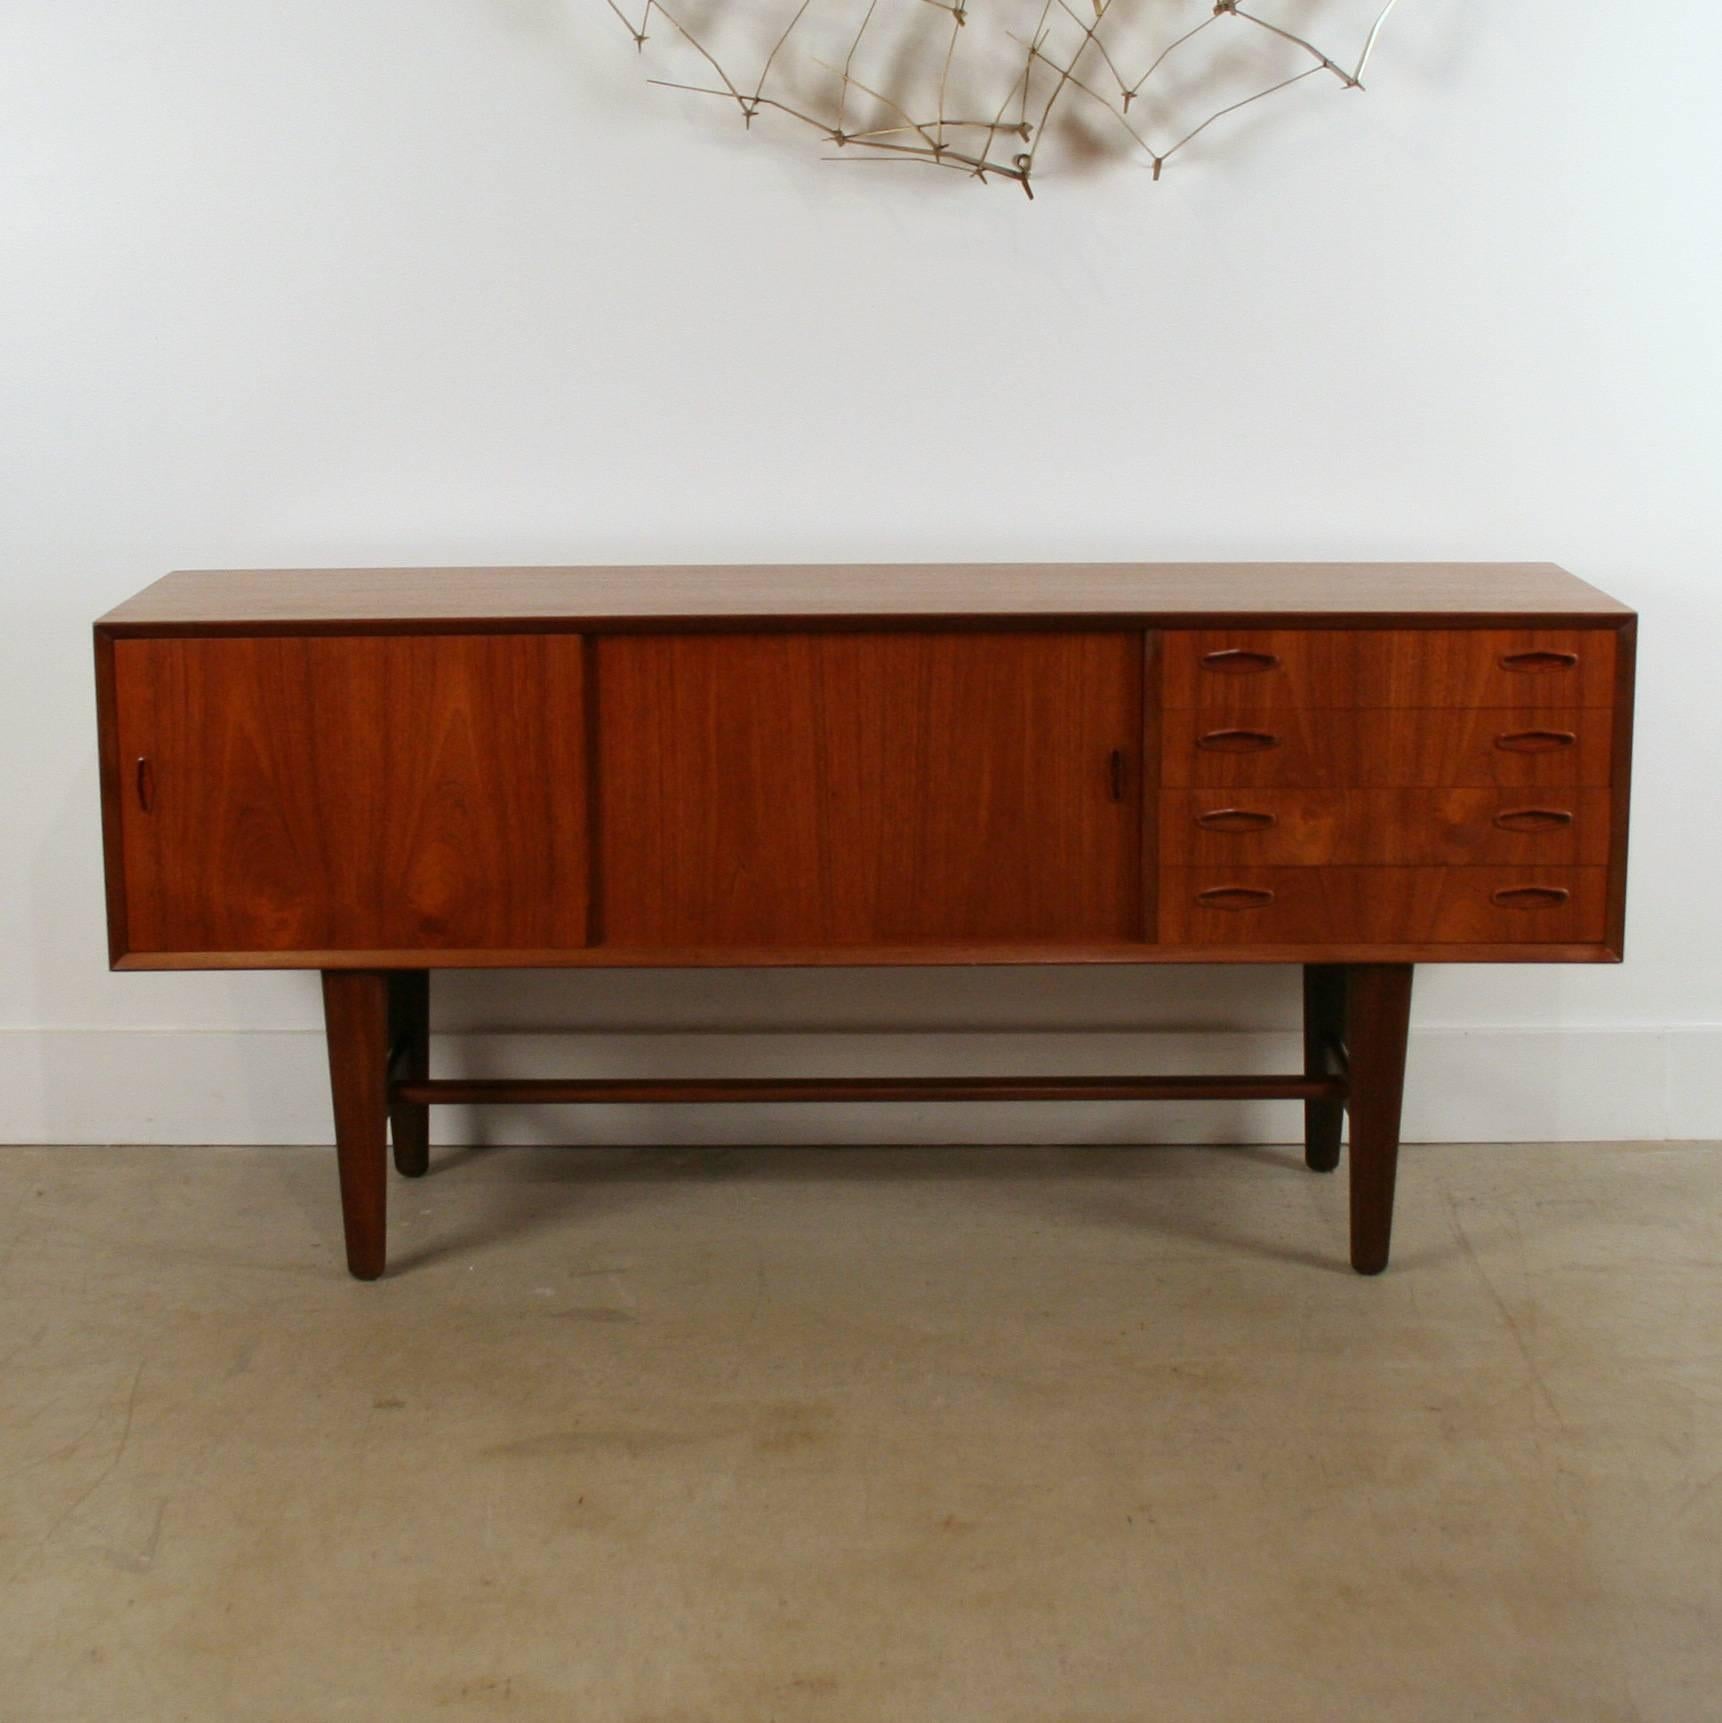 Wonderful vintage Danish teak sideboard. Two sliding doors open onto two storage spaces with a single shelf in each. This piece also features four drawers with dovetail joinery. Doors and drawers all feature delicate, inset framed finger pulls. Set